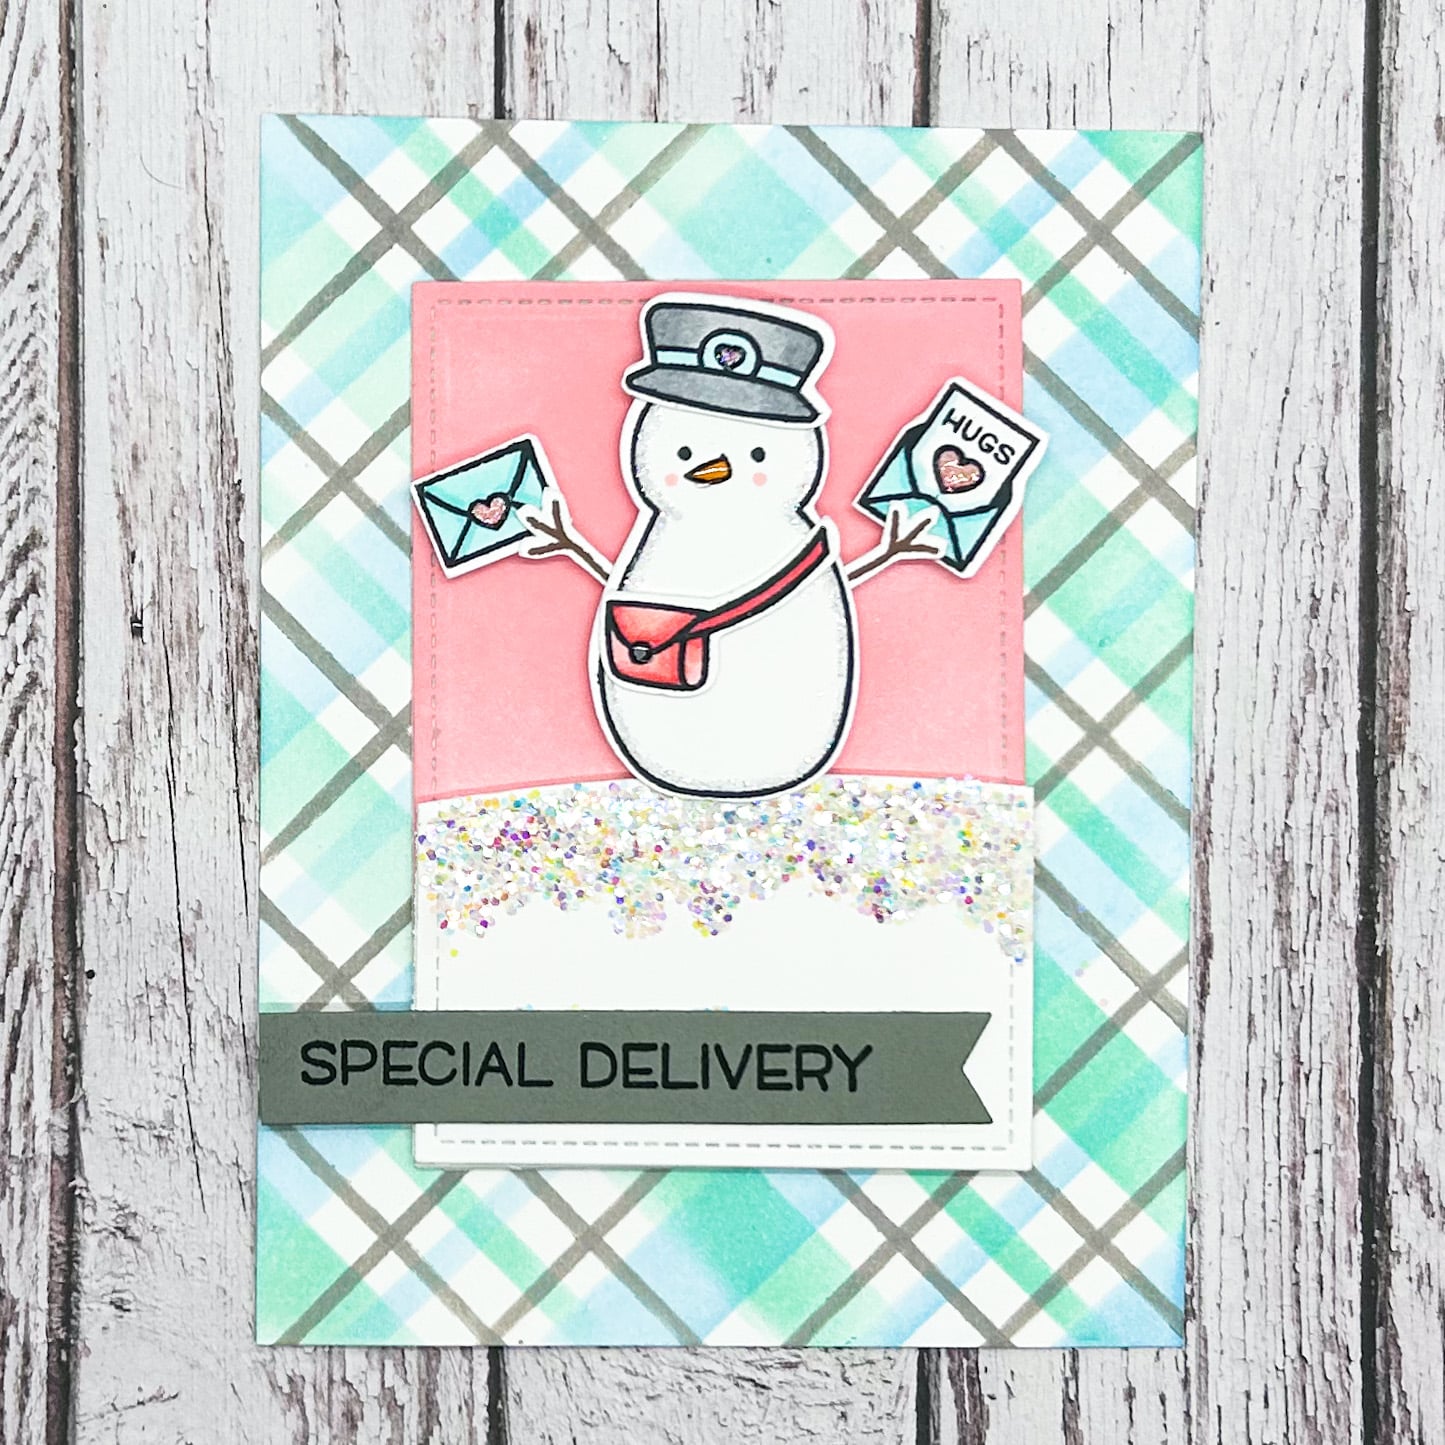 Snowman Delivery Of Hugs Handmade Card